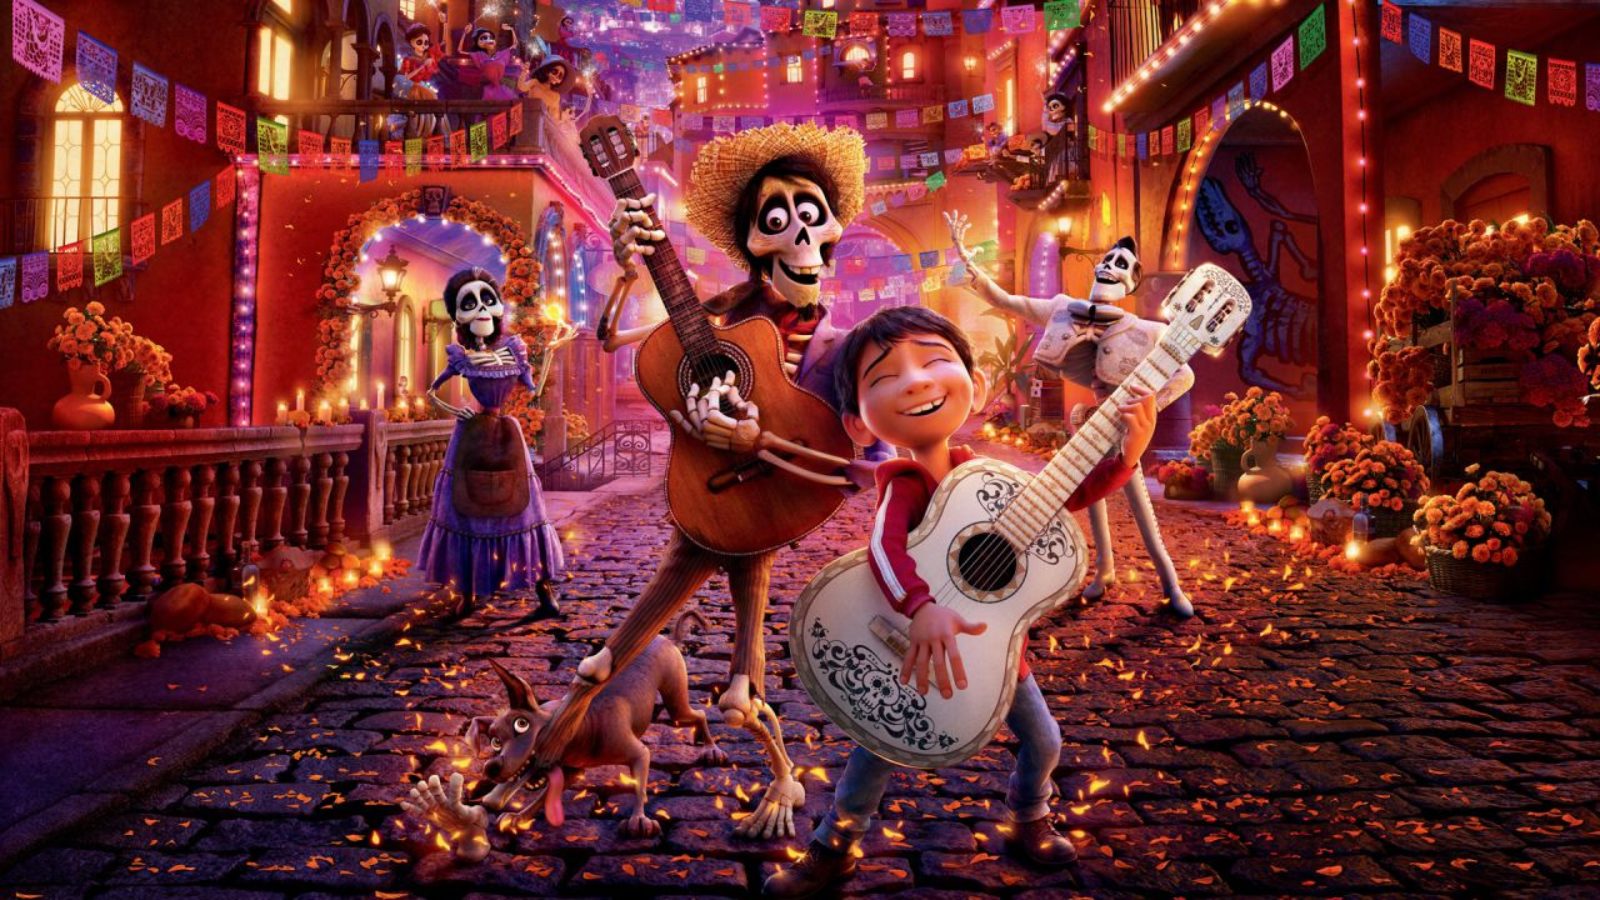 Coco Soundtrack - Every Song in the Pixar-Disney Movie